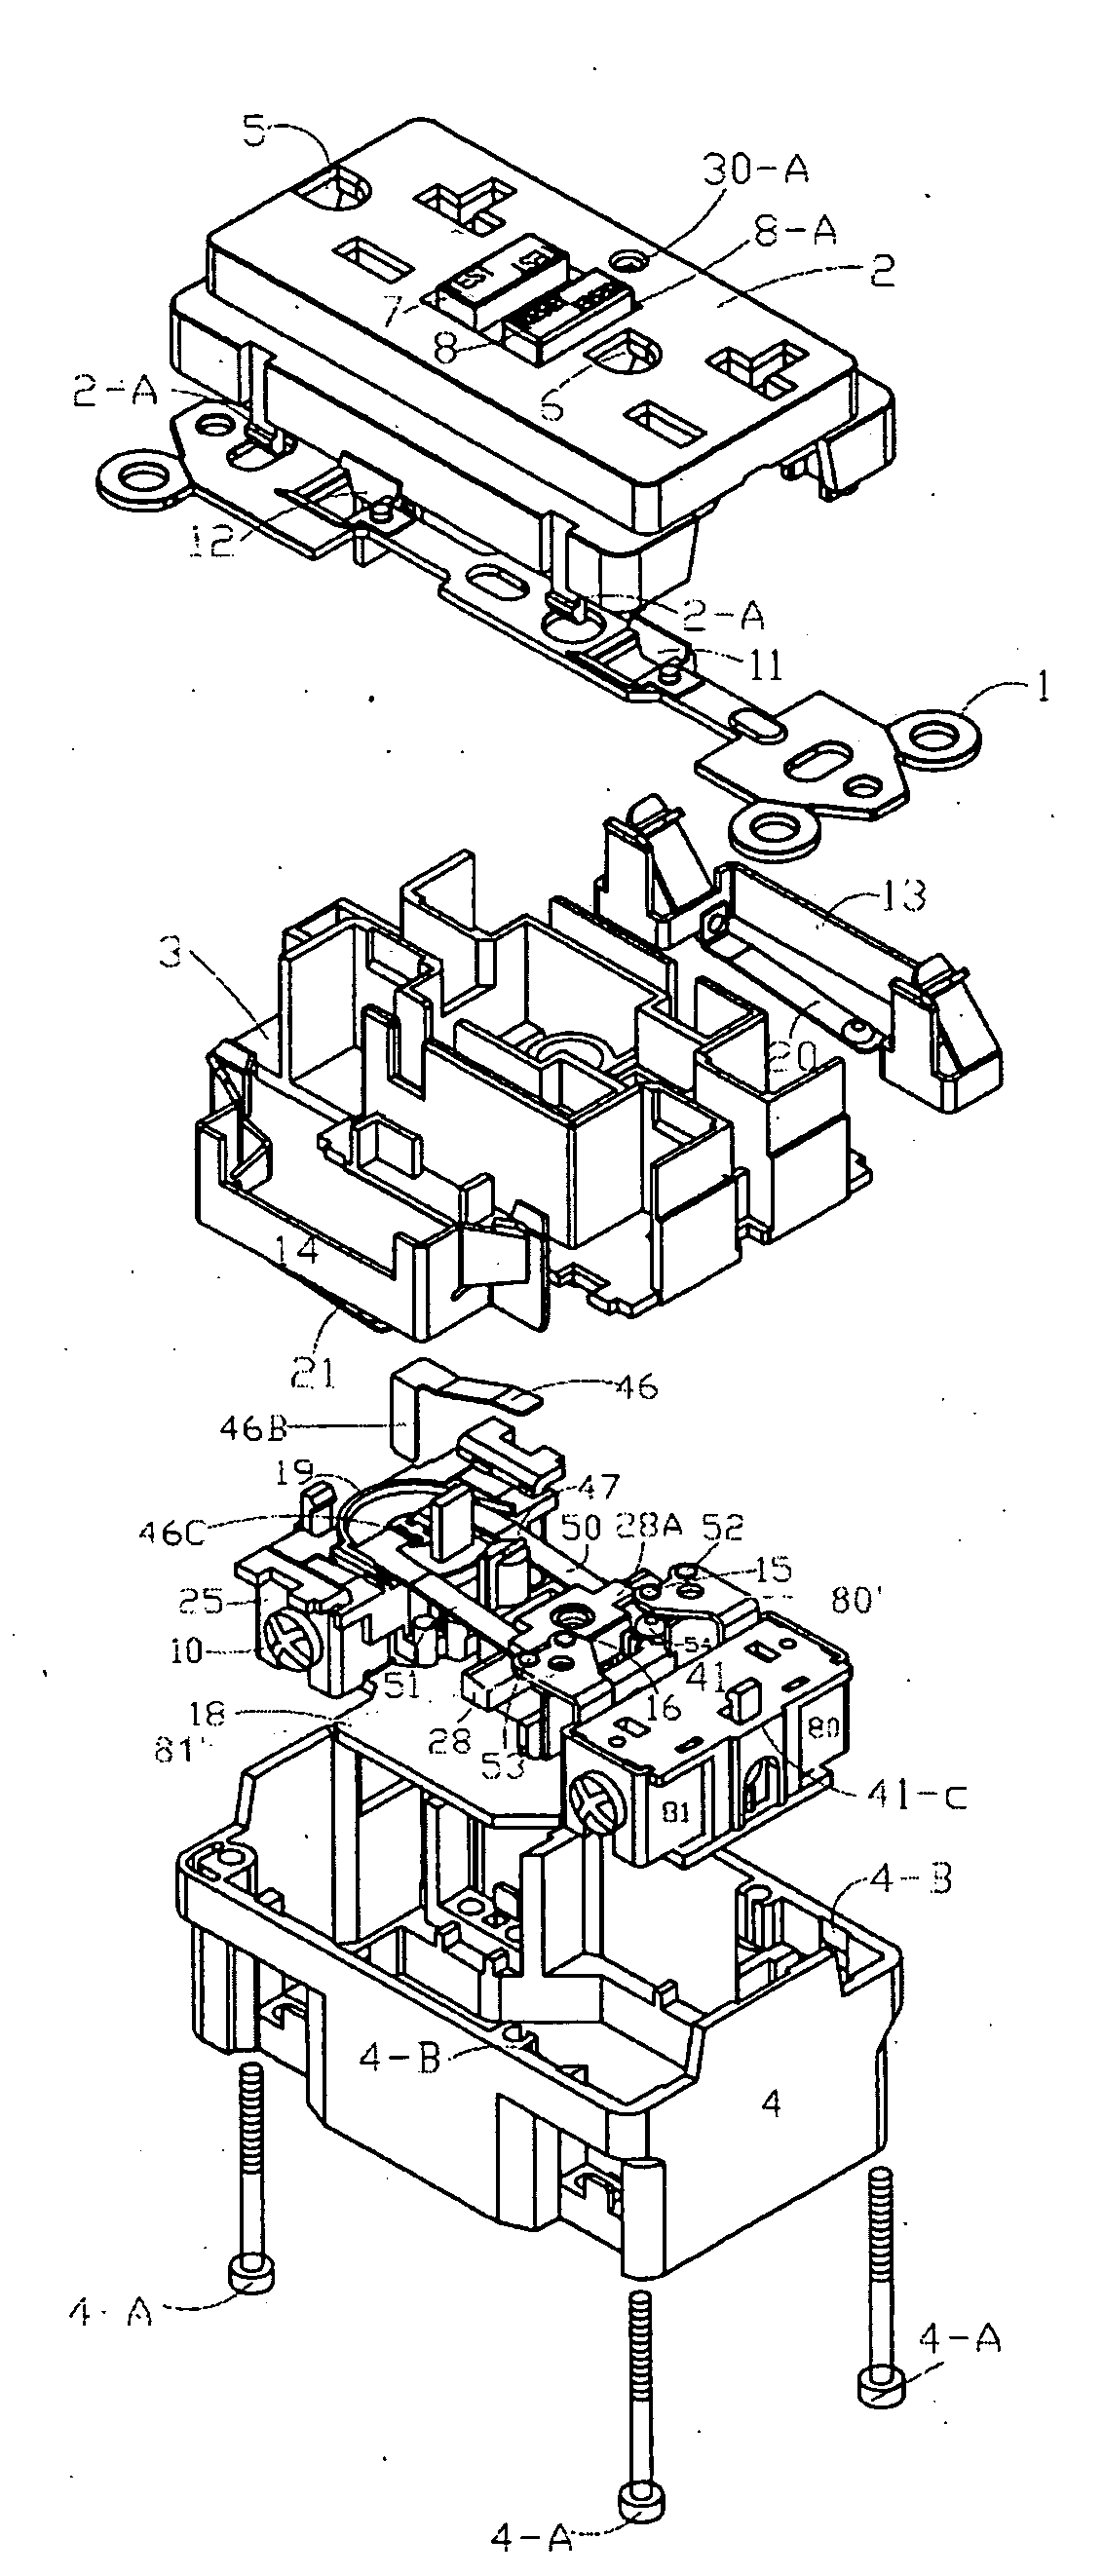 Novel circuit interrupting device with interconnecting reset and test buttons